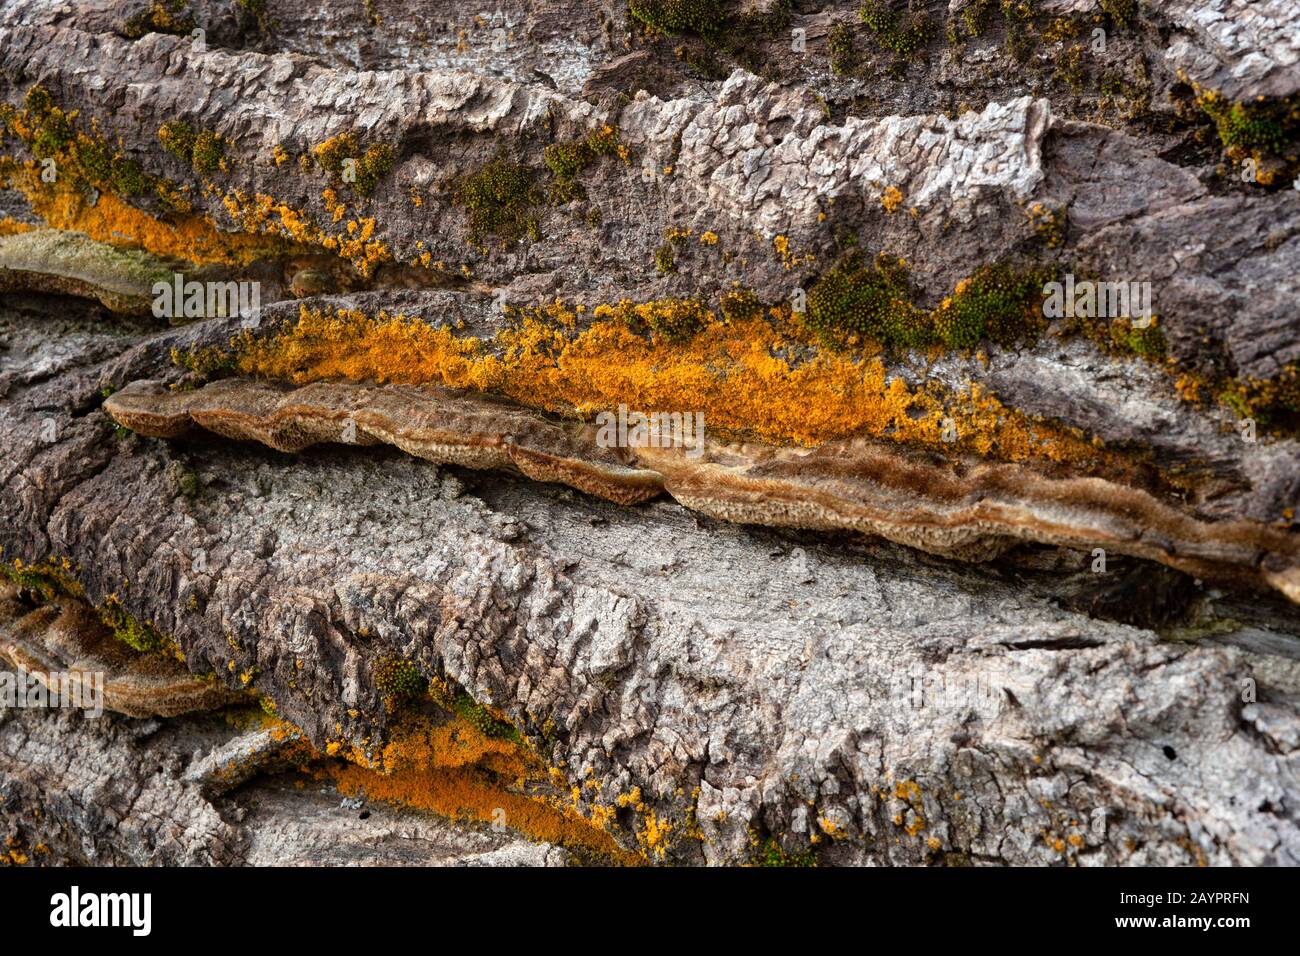 The fruiting body of a white rot fungus, Trametes trogii, with orange lichen and green moss, on the trunk of a dead black cottonwood tree. Stock Photo